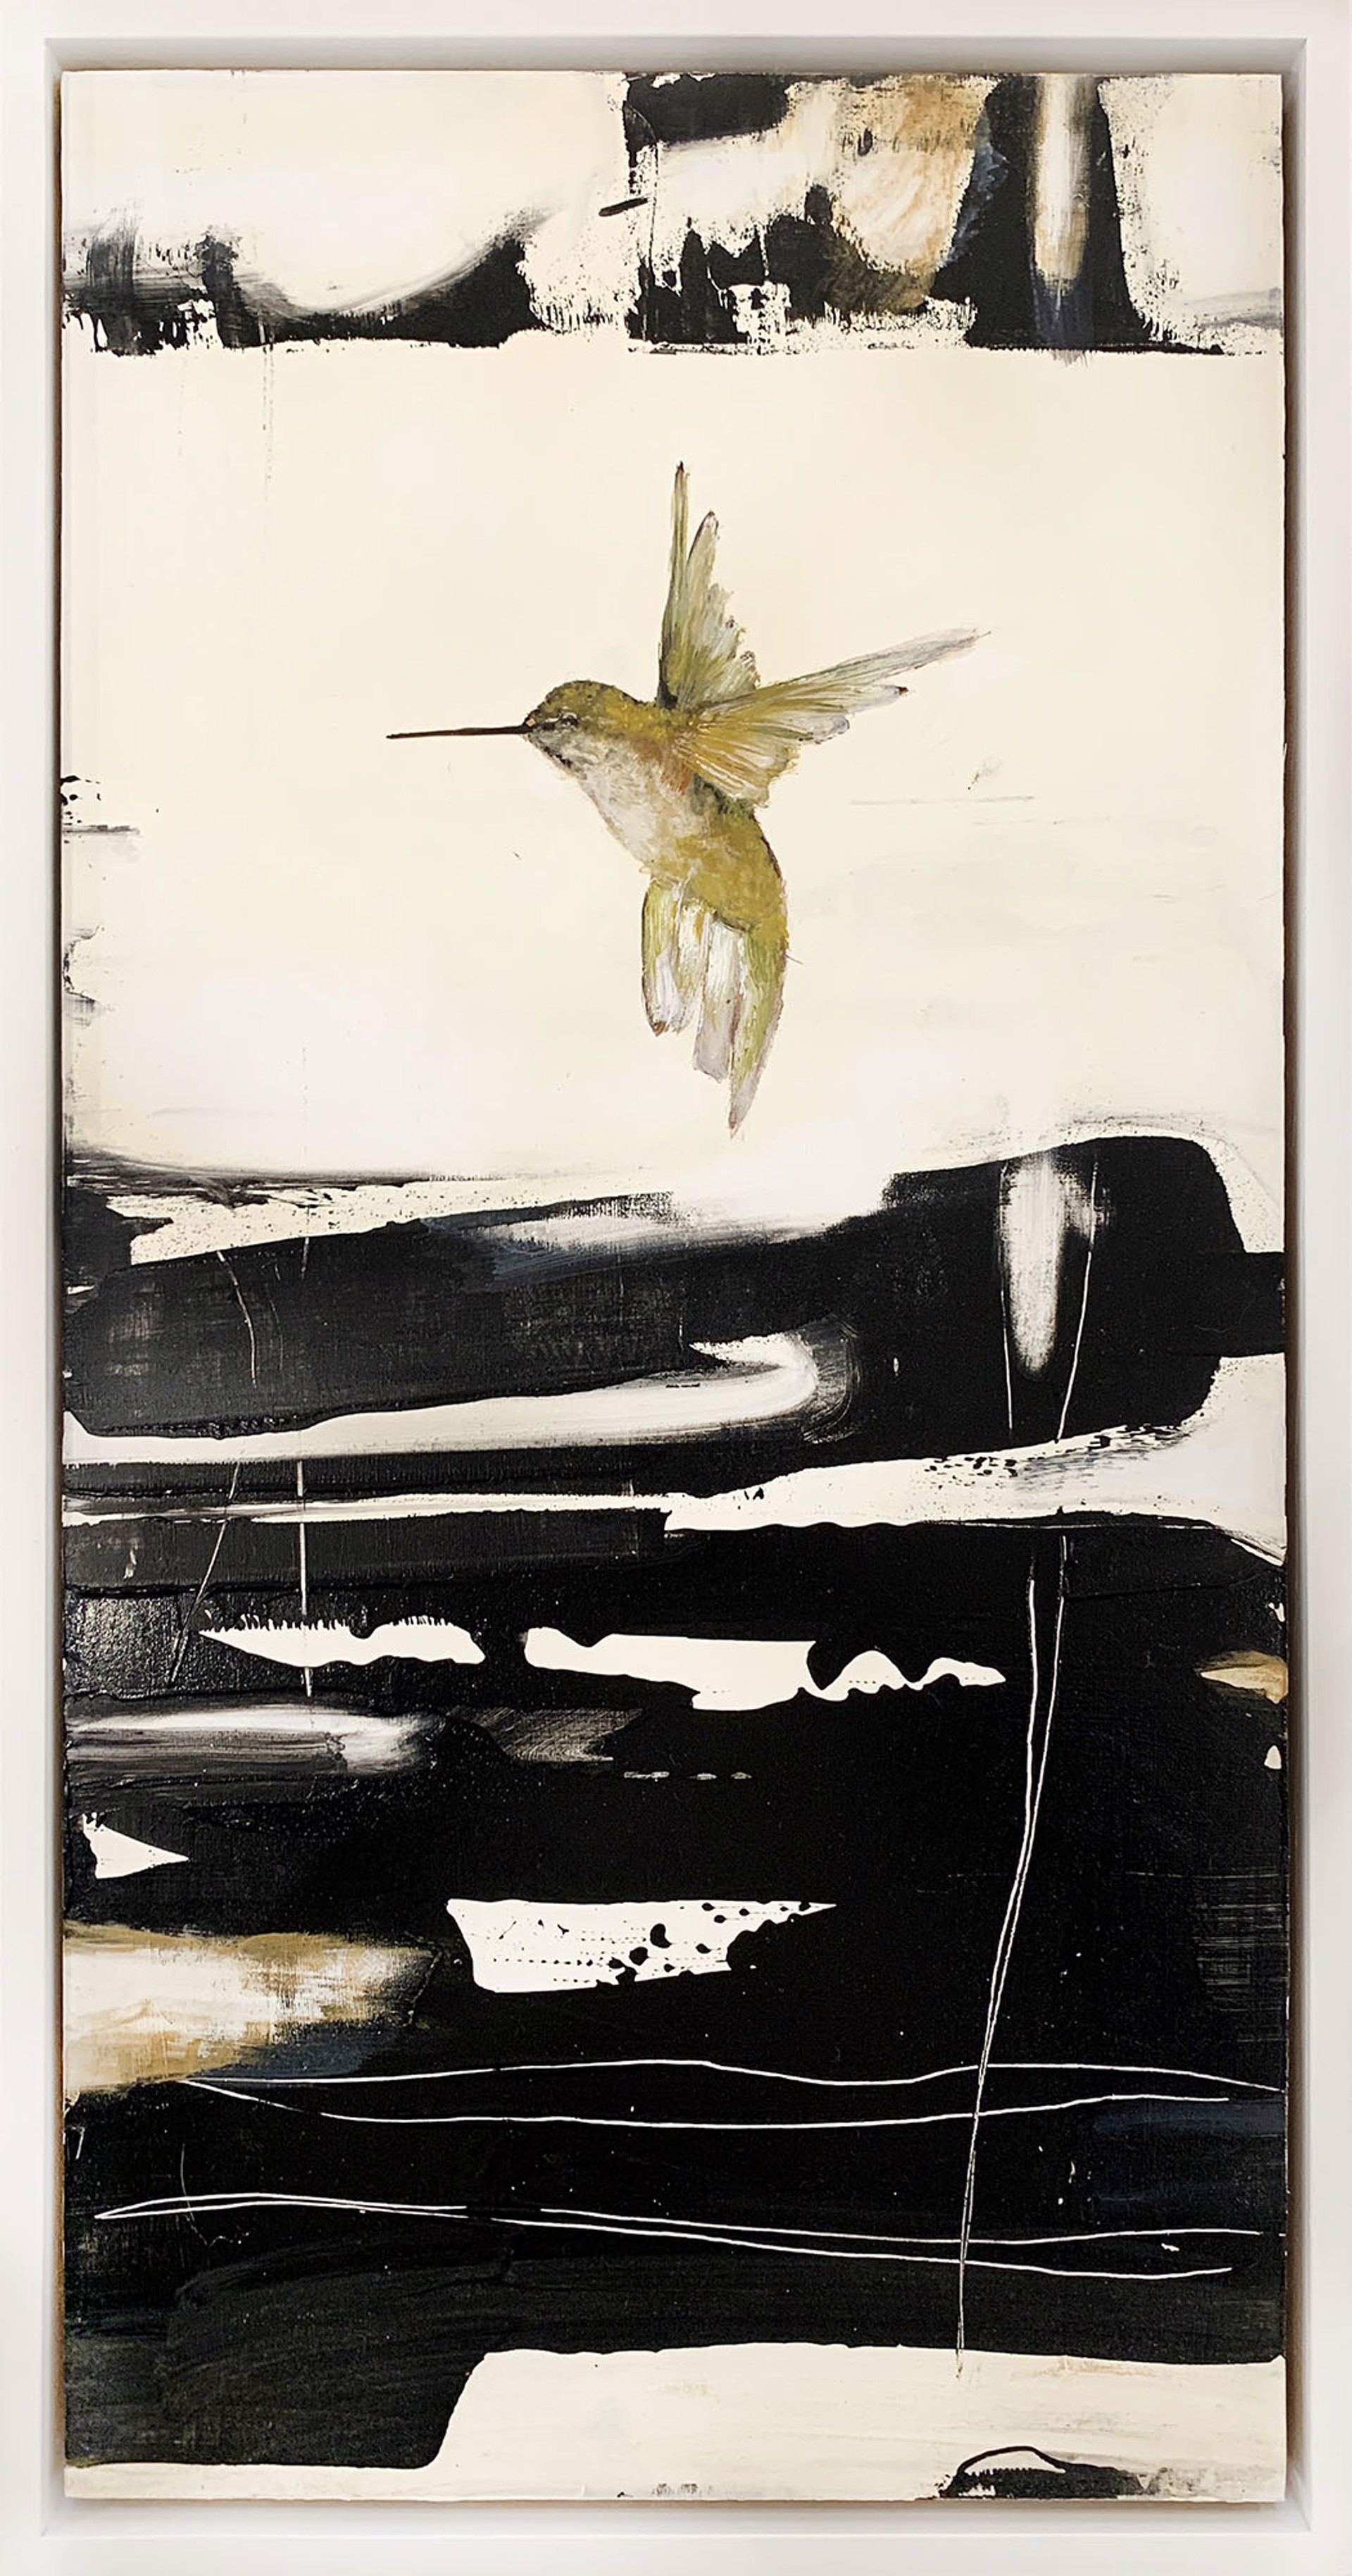 Original Mixed Media Painting Featuring A Single Hummingbird Over Abstract Black And White Background